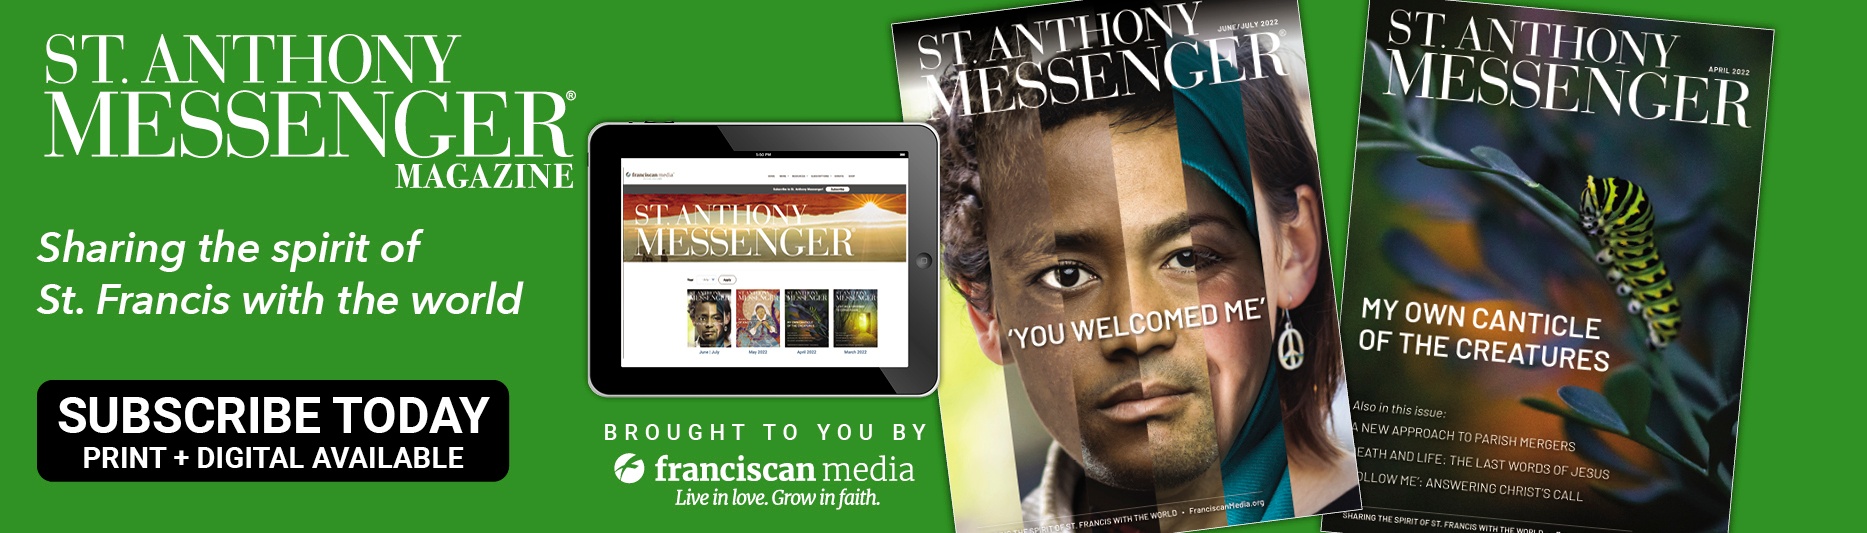 Subscribe to St. Anthony Messenger magazine!